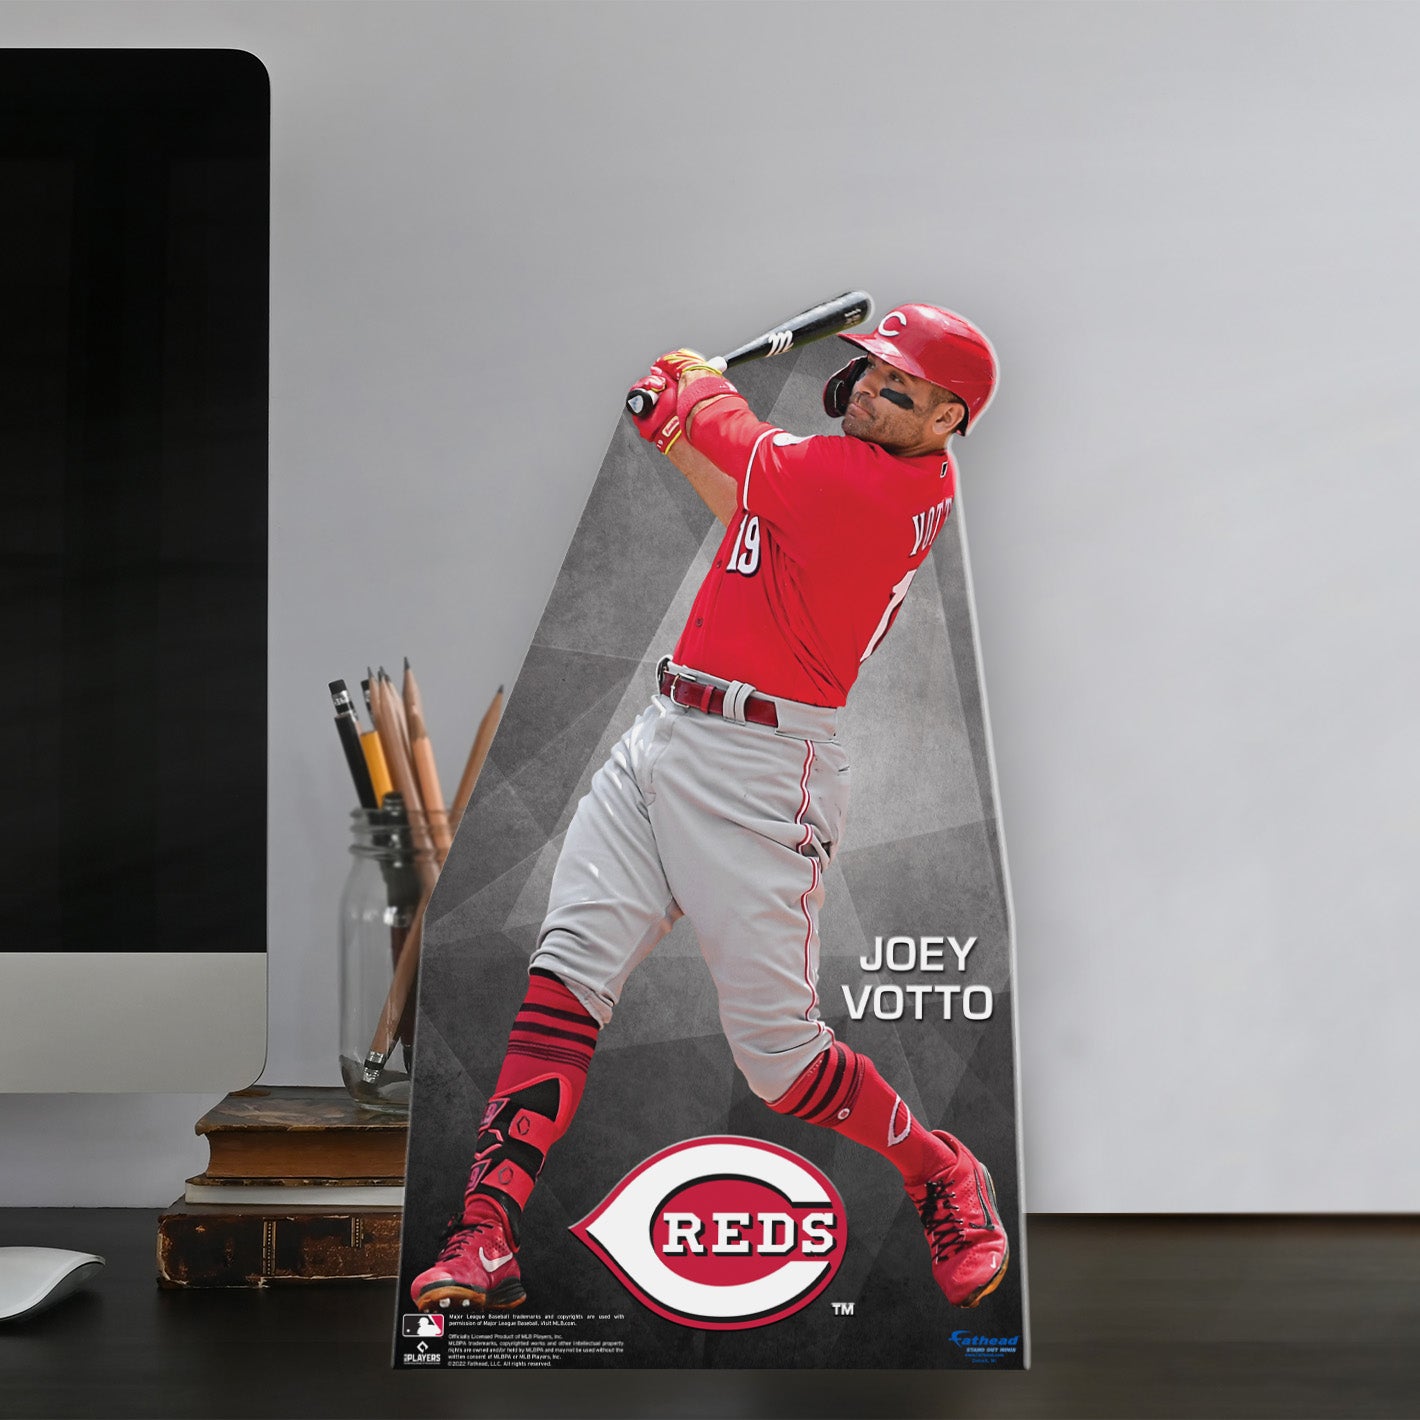 Cincinnati Reds: Joey Votto 2022  Mini   Cardstock Cutout  - Officially Licensed MLB    Stand Out